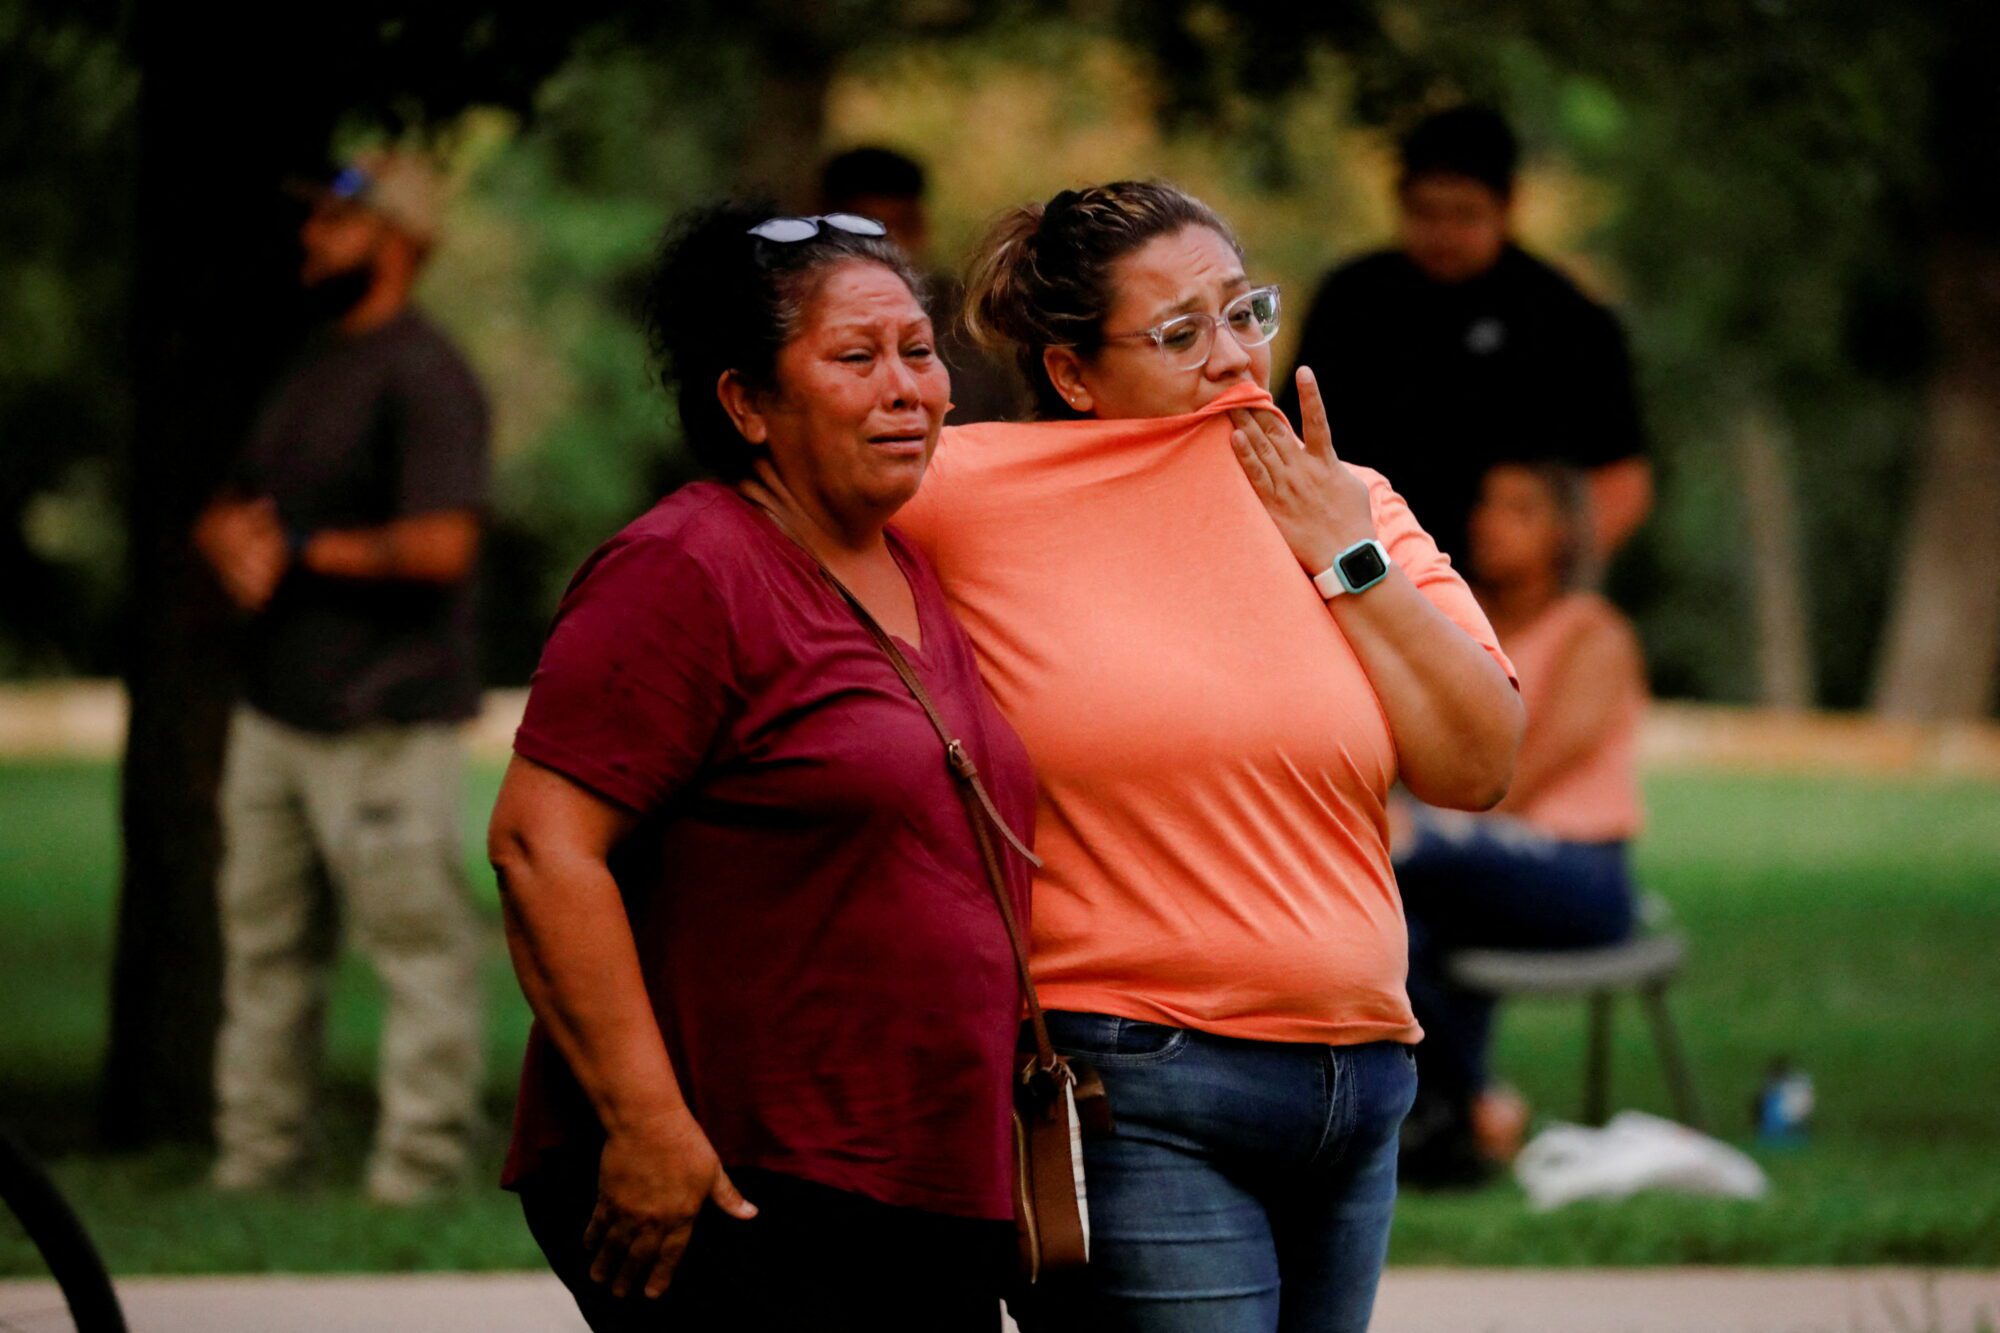 People react outside the Ssgt Willie de Leon Civic Center, where students had been transported from Robb Elementary School after a shooting, in Uvalde, Texas, U.S. May 24, 2022. REUTERS/Marco Bello